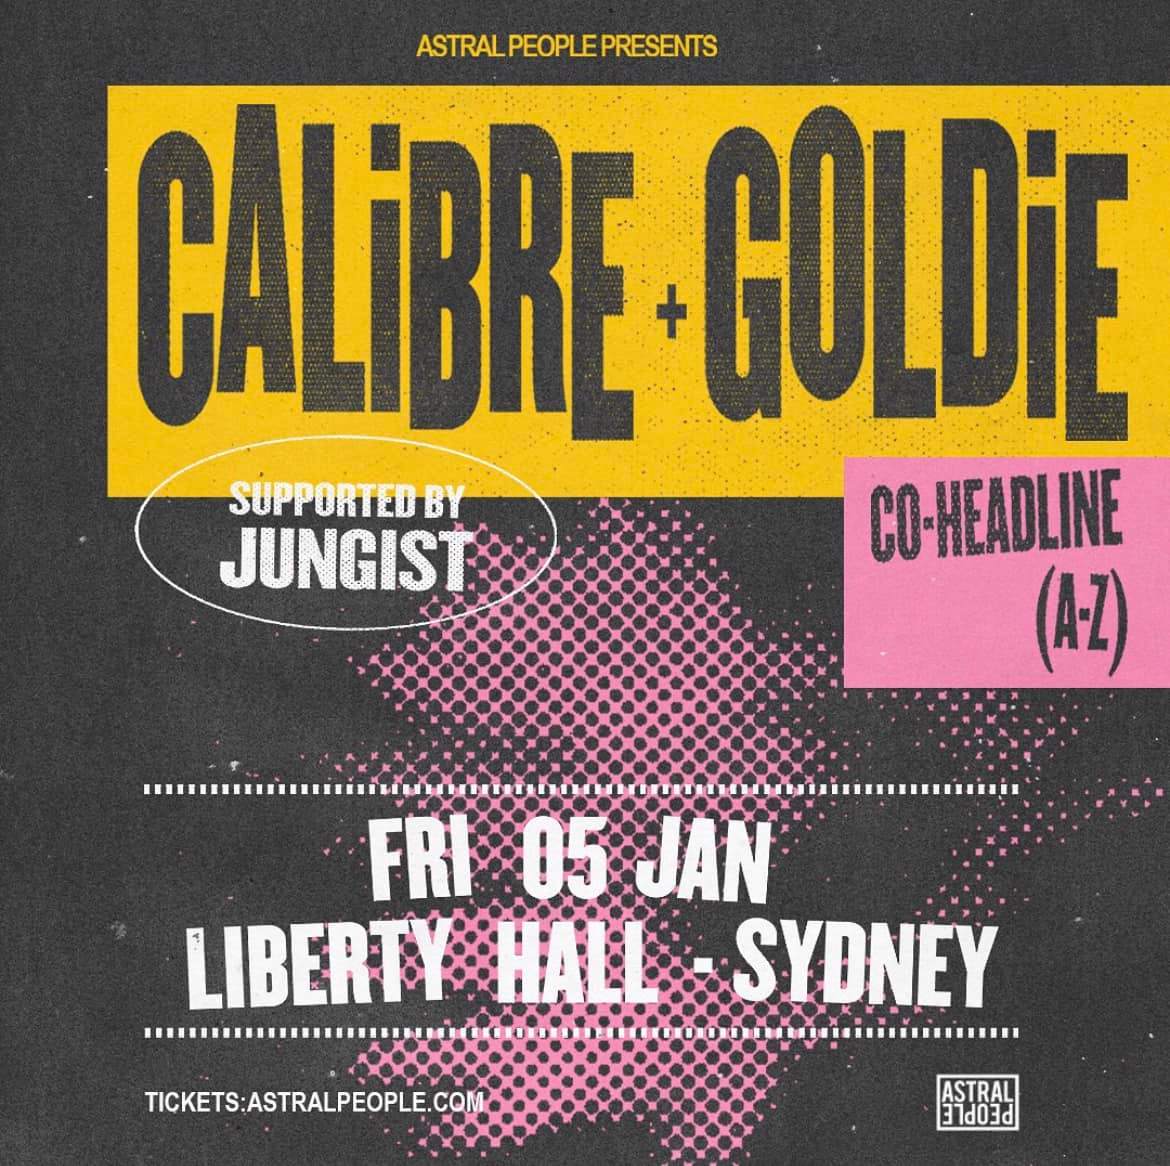 Astral People presents: Calibre + Goldie - フライヤー表